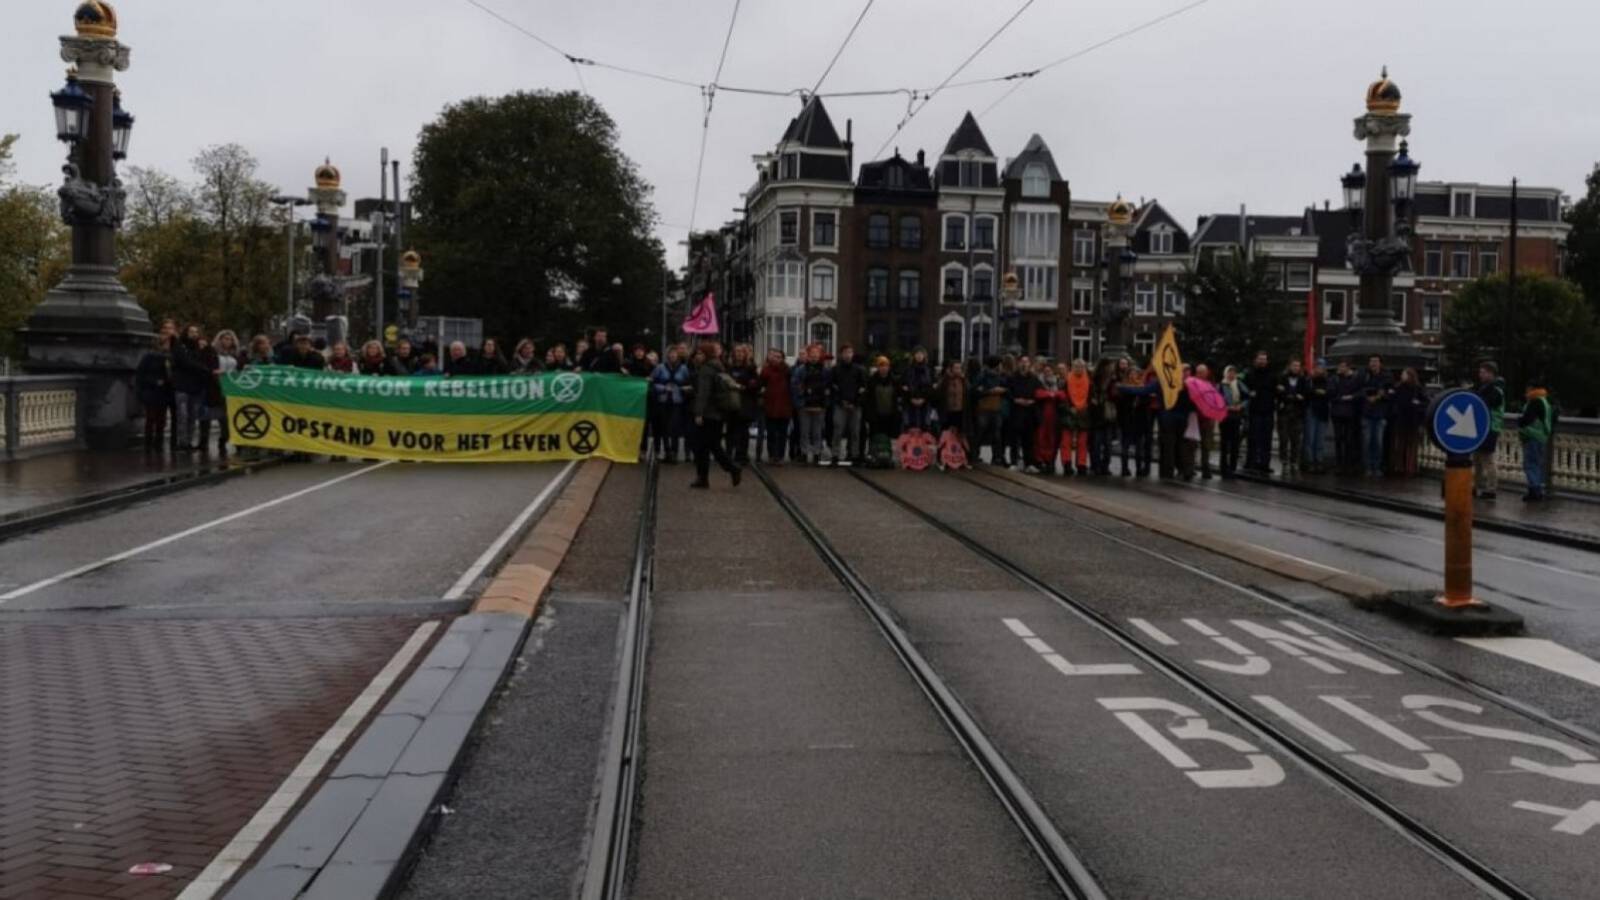 Extinction Rebellion climate protest in Amsterdam, the Netherlands